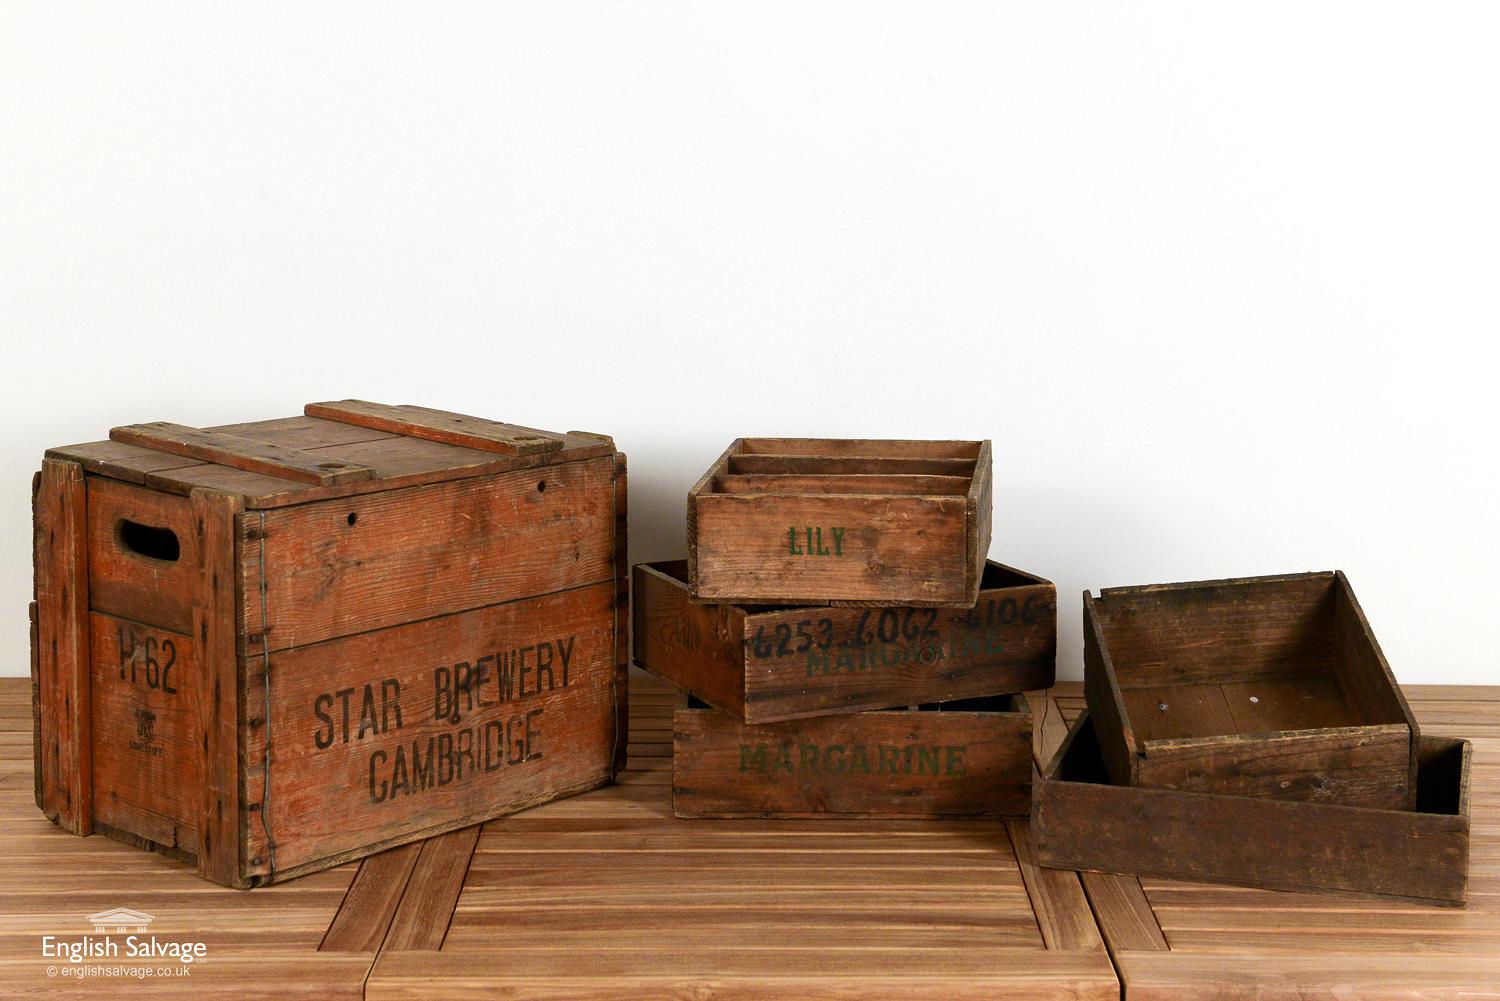 Selection of reclaimed wooden crates. Three margarine / lily crates are each roughly 34.5 cm wide x 10.5 cm high x 28 cm deep and have two dividers, one single crate is 37.5 cm wide x 8 cm high x 28 cm deep and the smallest single crate is 29.2 cm